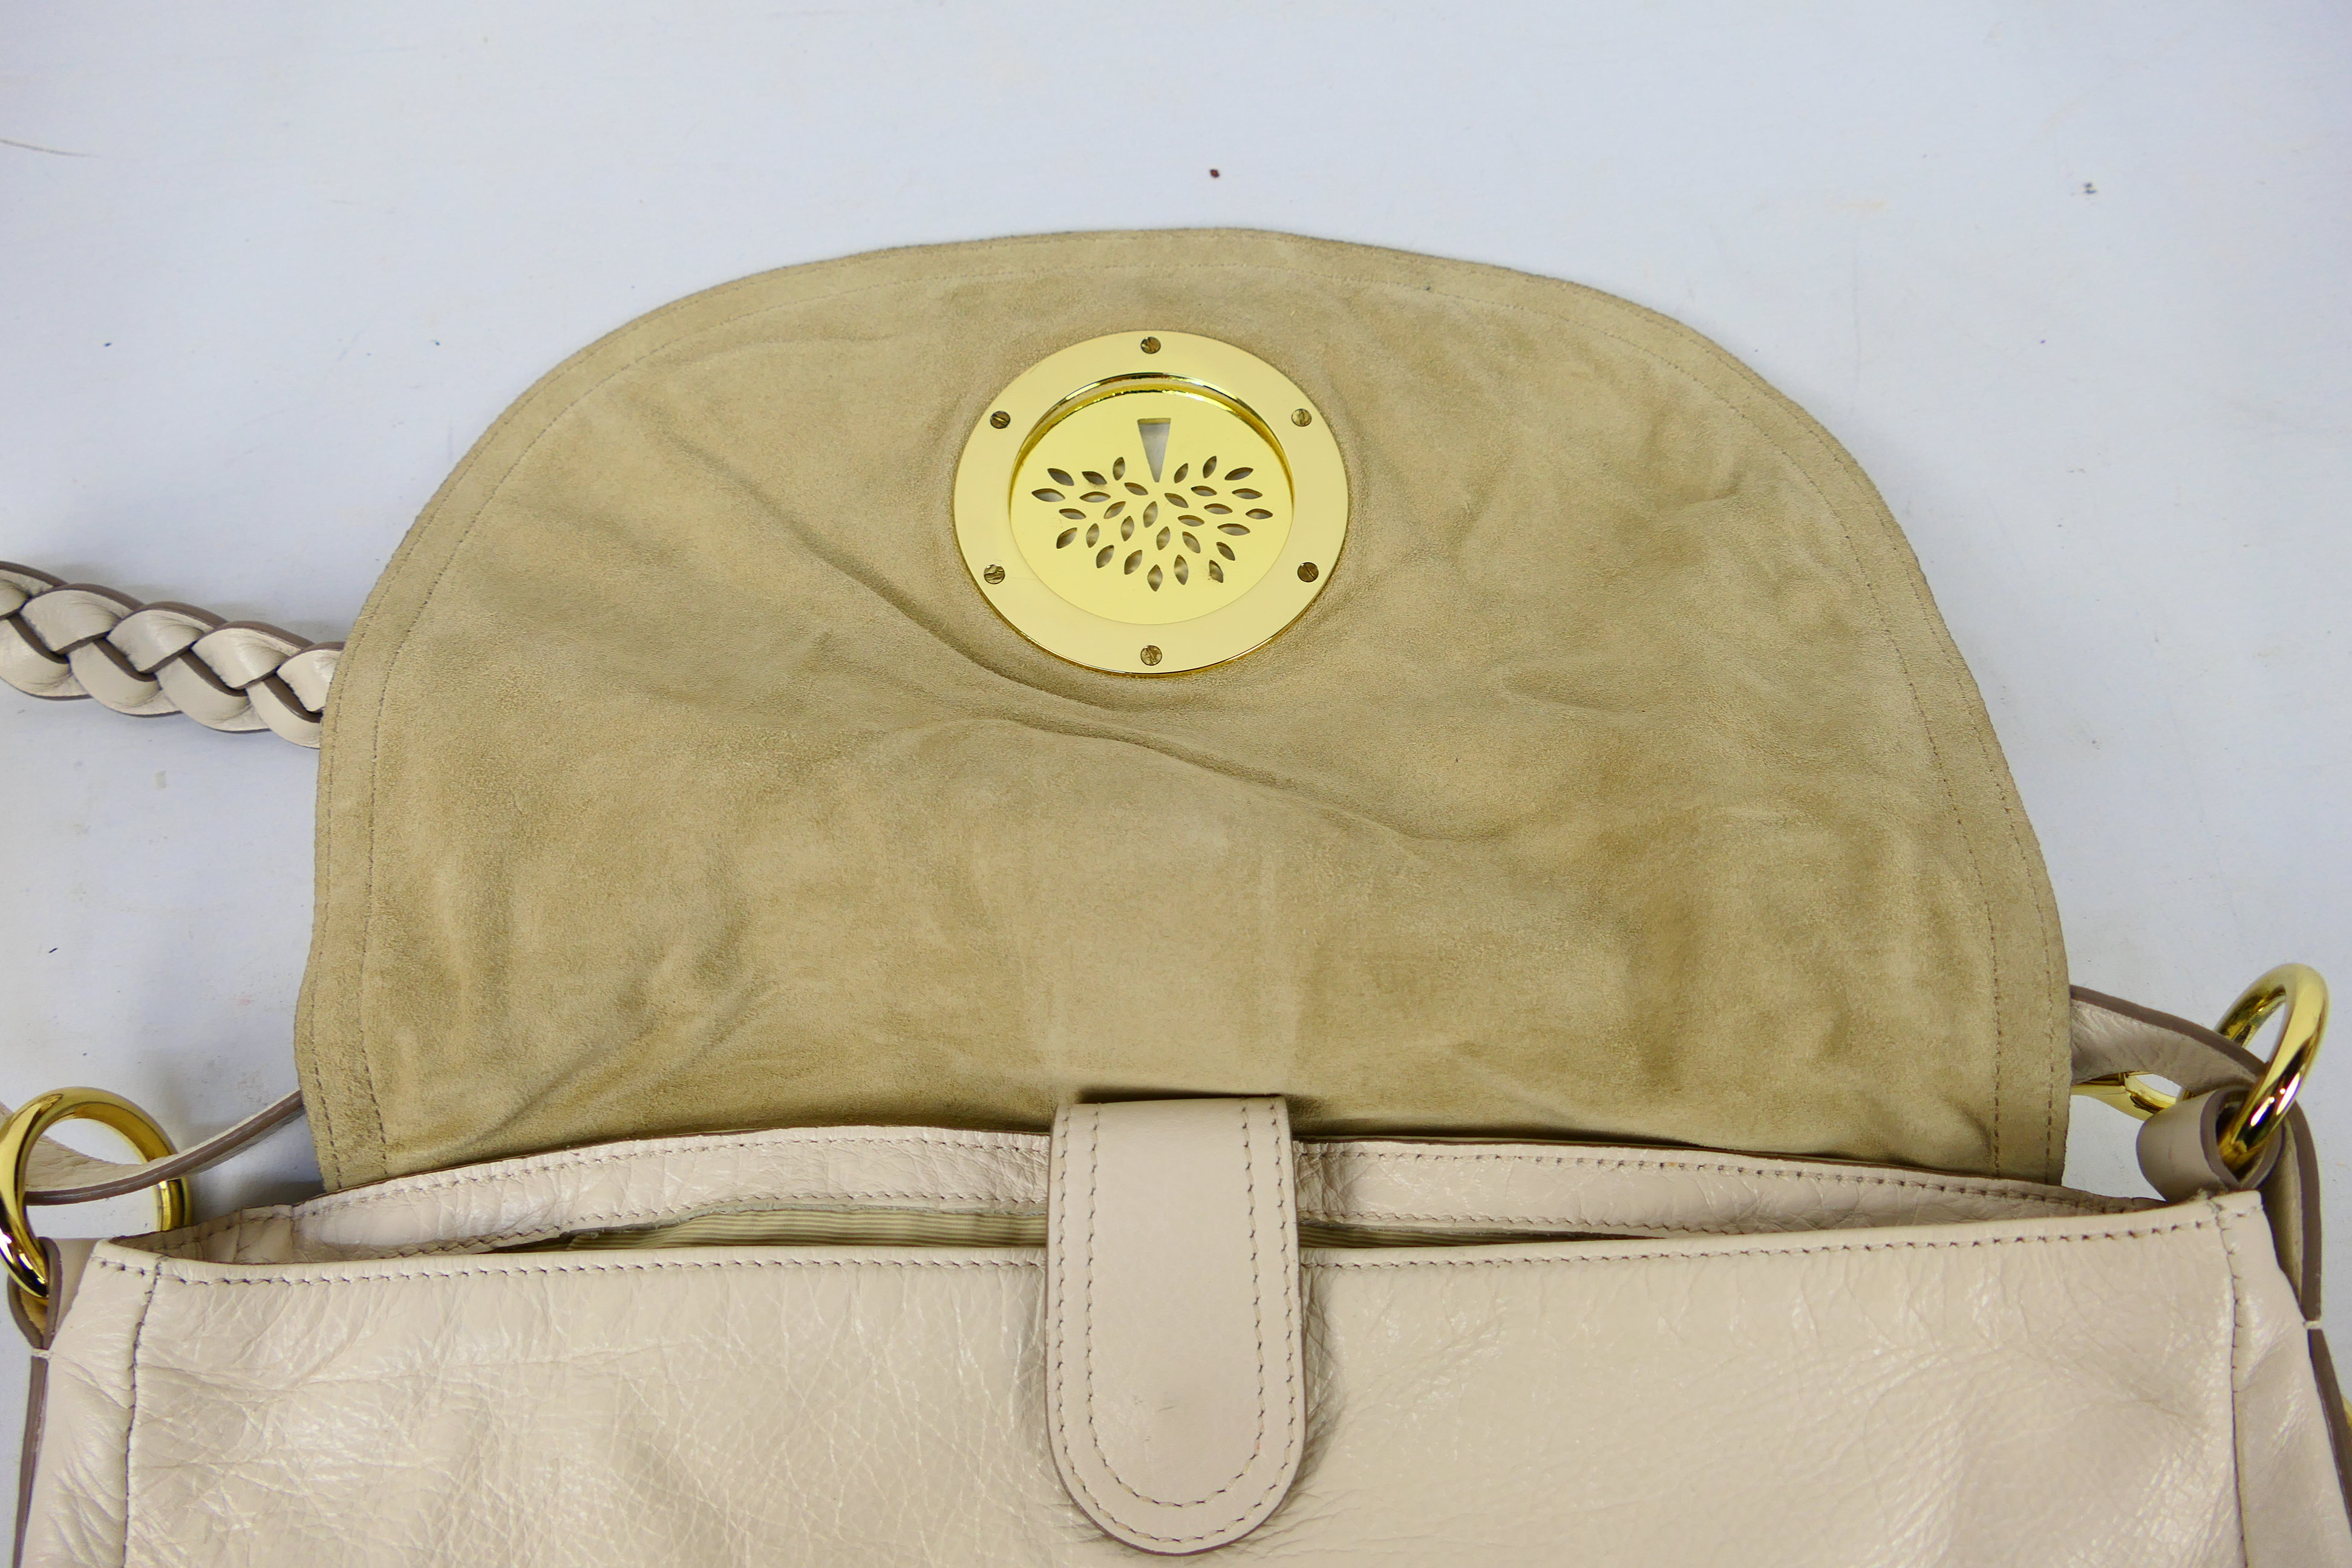 Mulberry - An ivory-coloured Mulberry leather handbag - Handbag has one interior zip pocket and one - Image 7 of 9